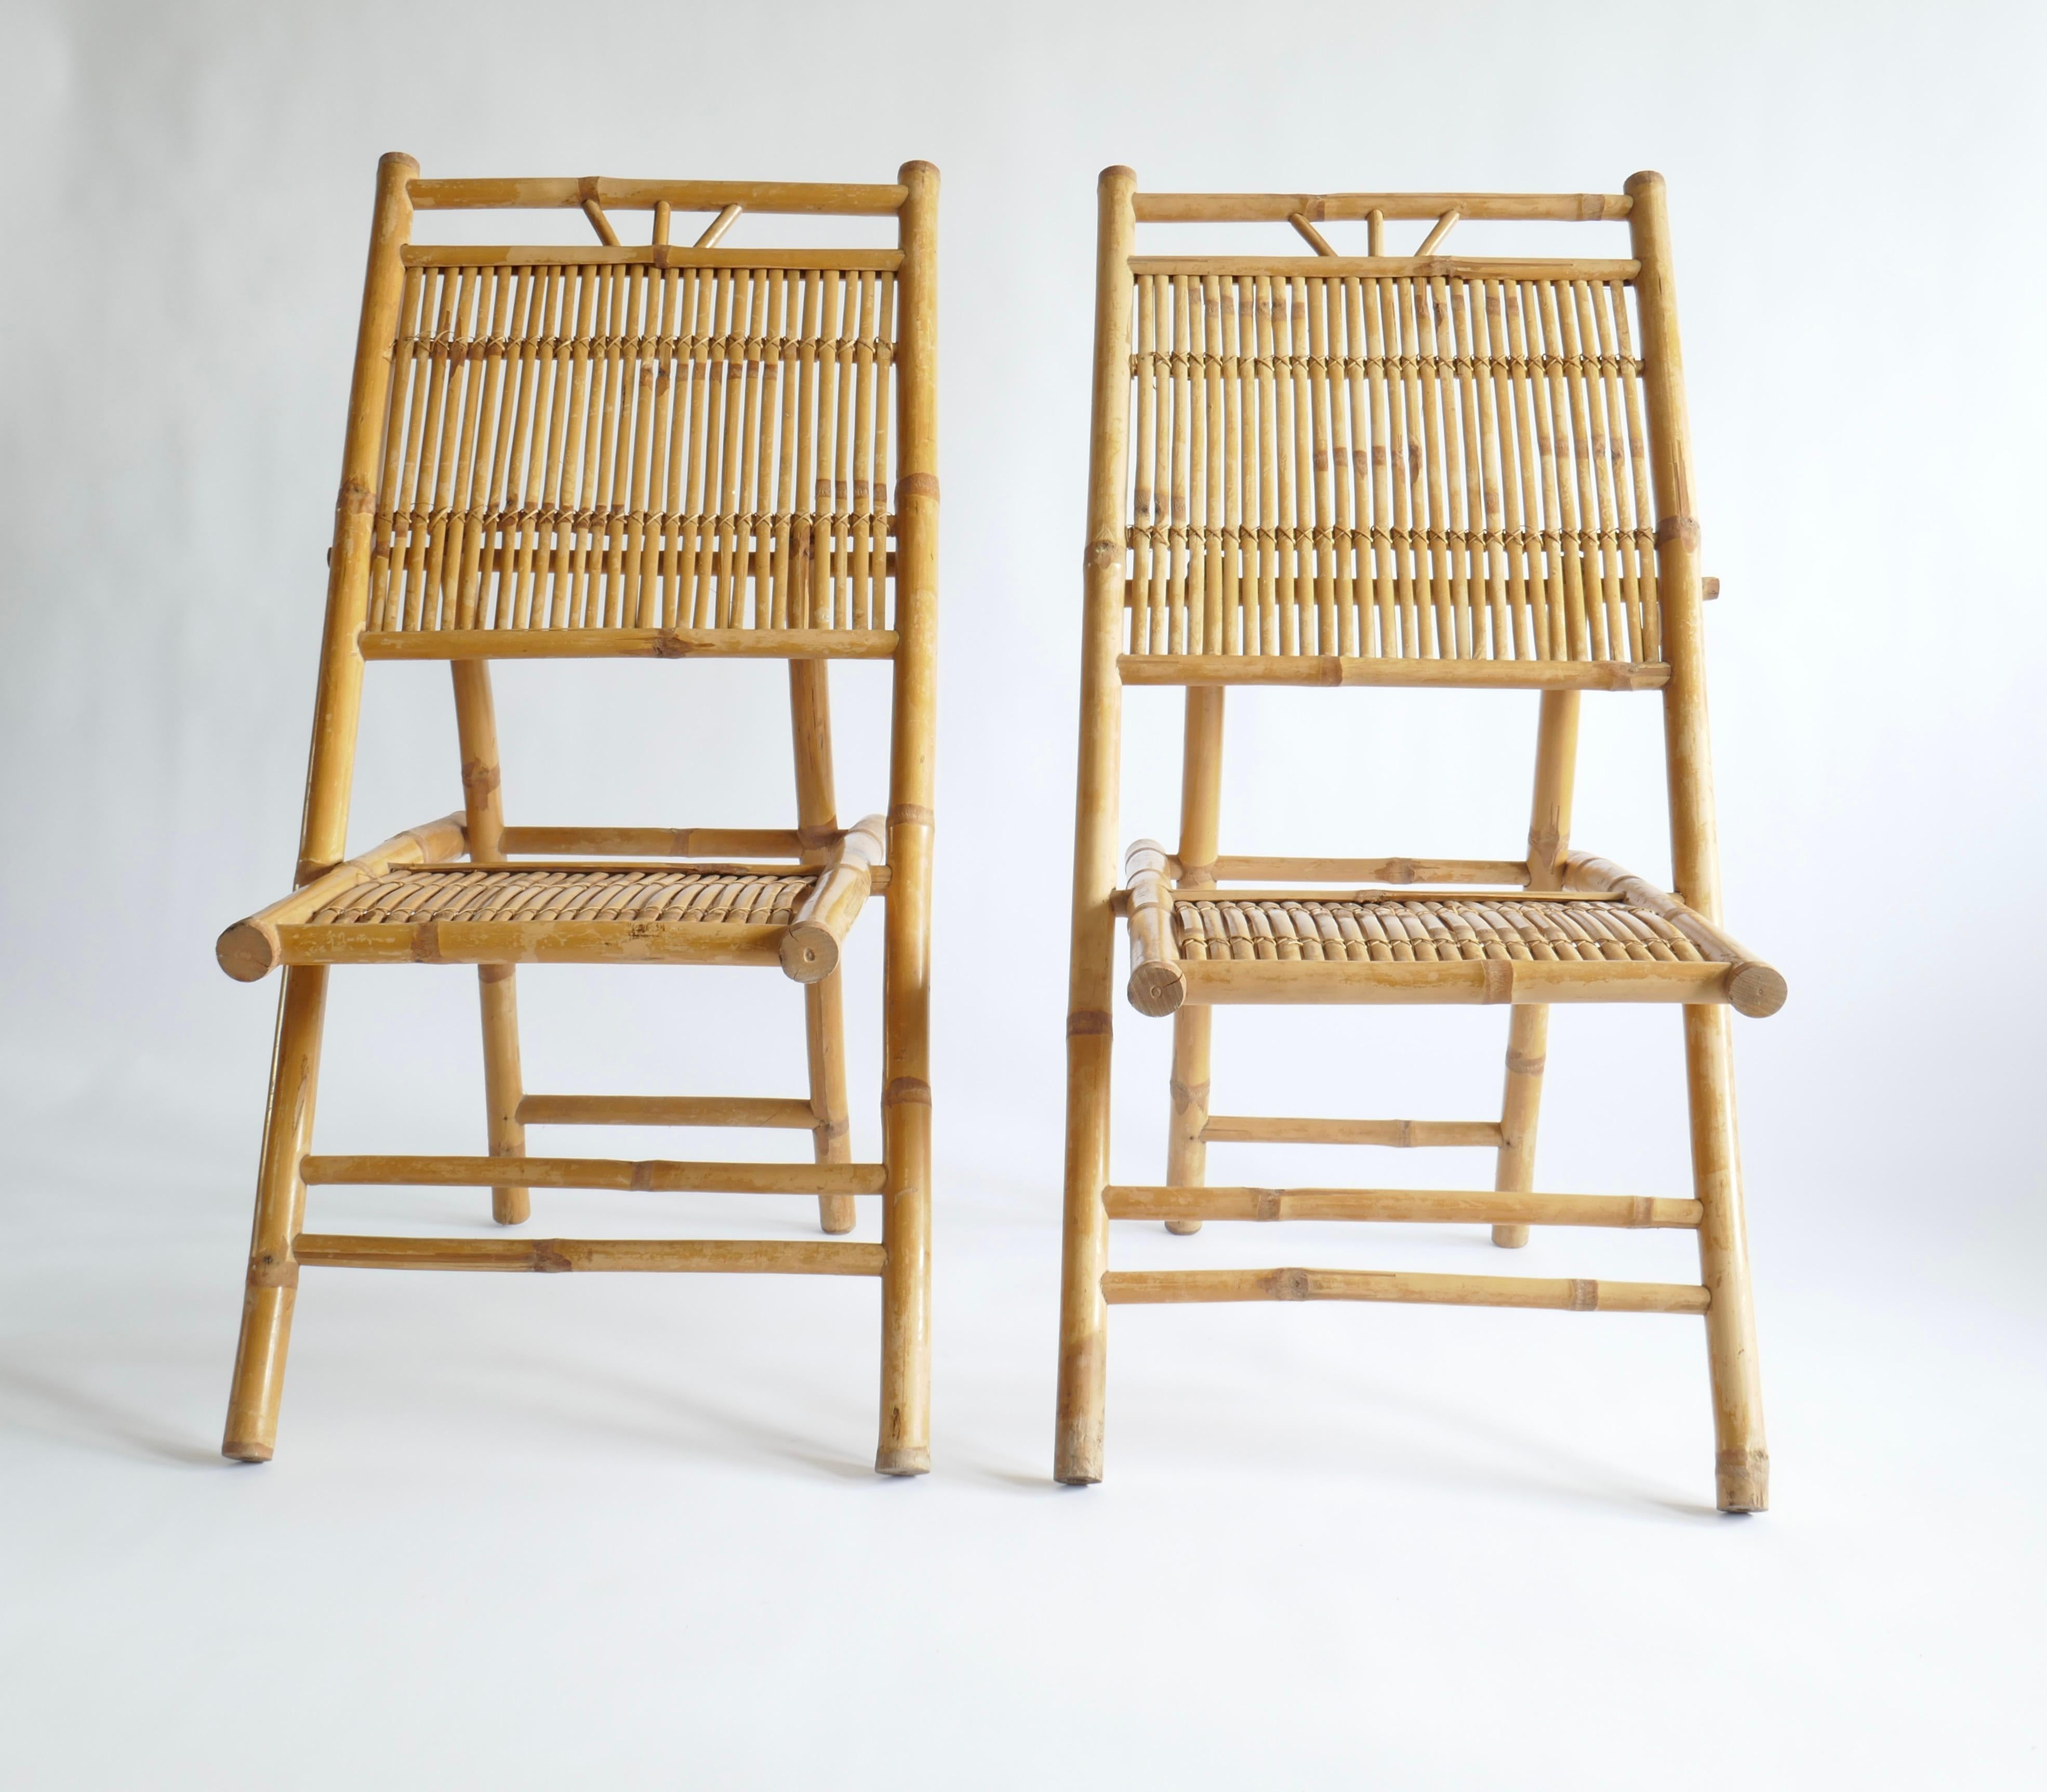 Elegant pair of Italian Mid-Century Modern Rattan and bamboo side chairs or lounge chairs. They have a classic X-form leg structure and are constructed using rattan slatting arranged and hand sewn together to allow transparency between the slats,